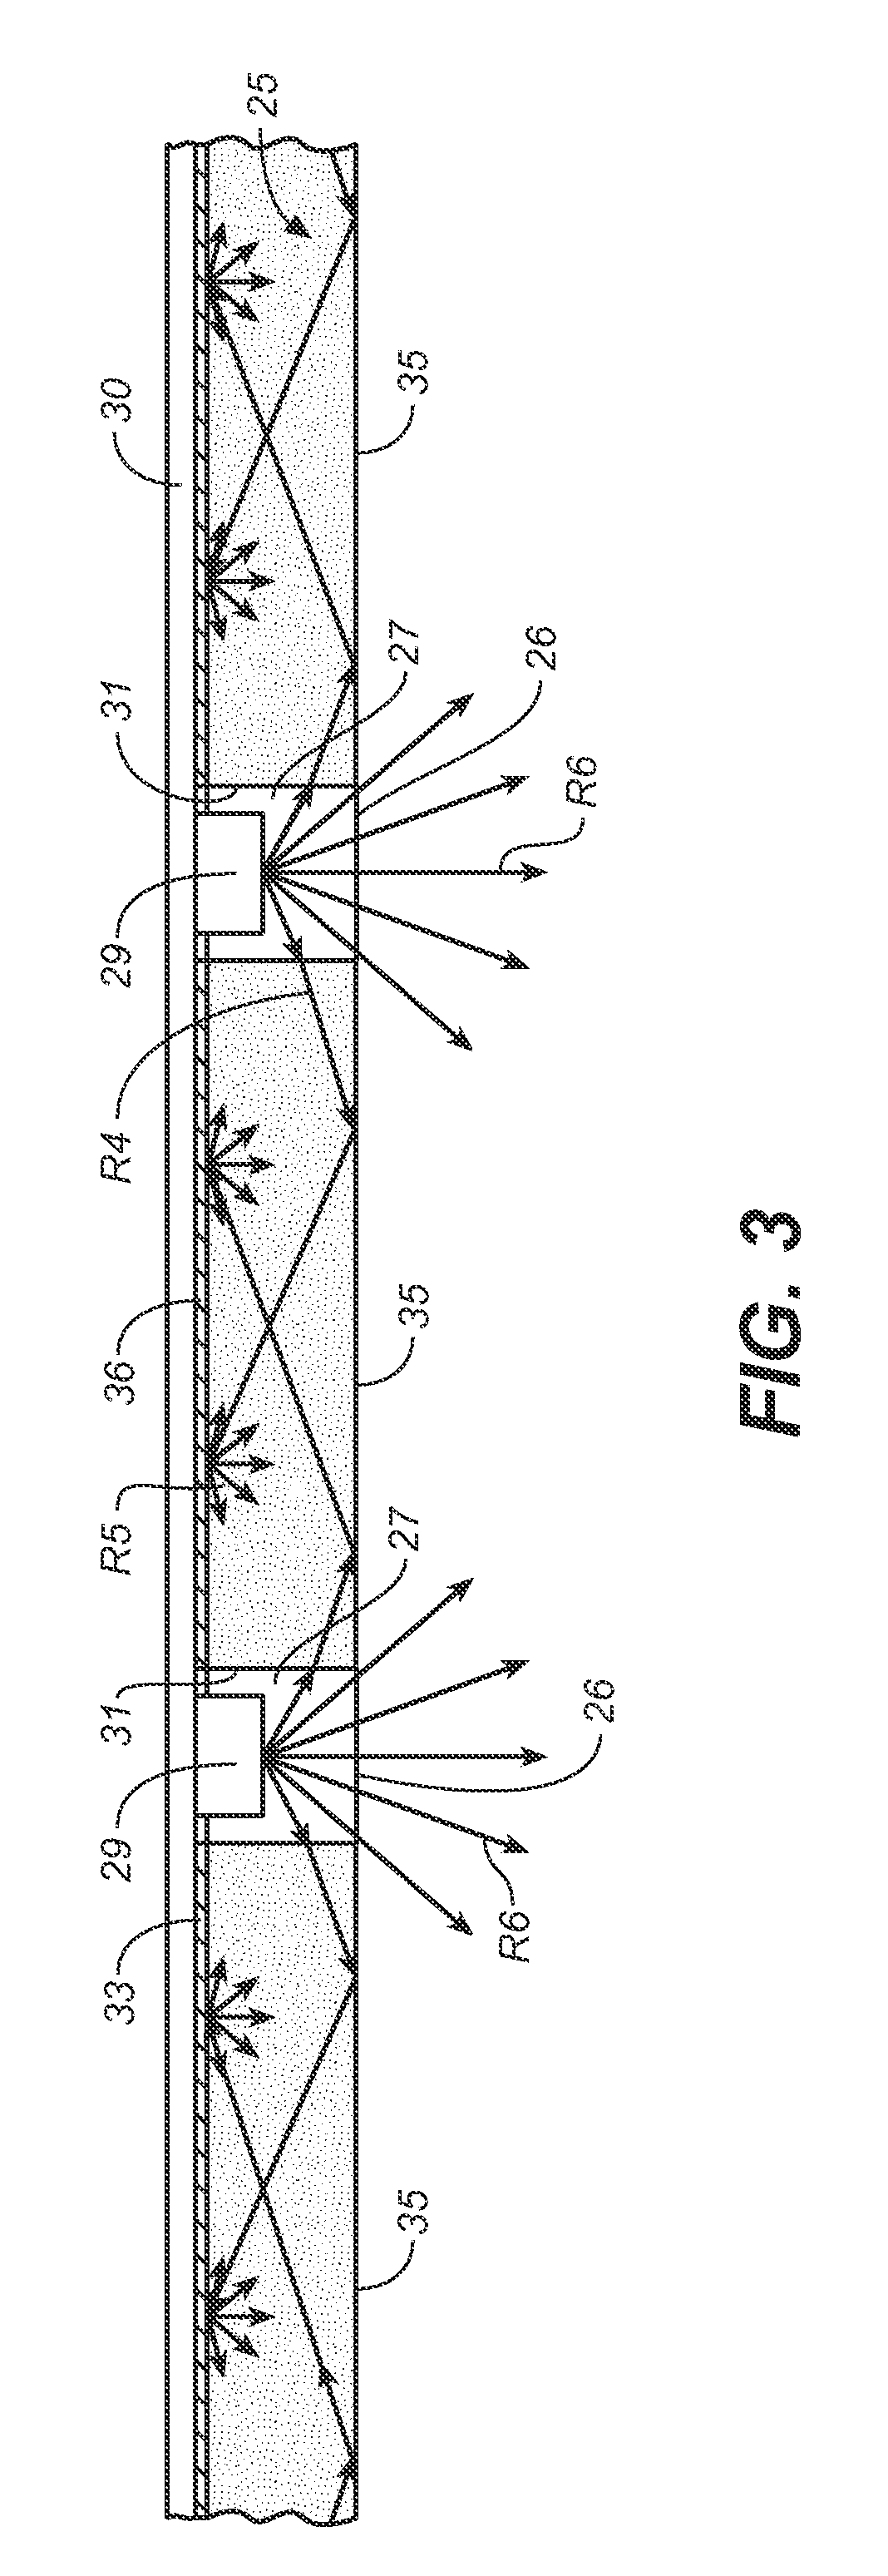 Optical system and method for managing brightness contrasts between high brightness light sources and surrounding surfaces